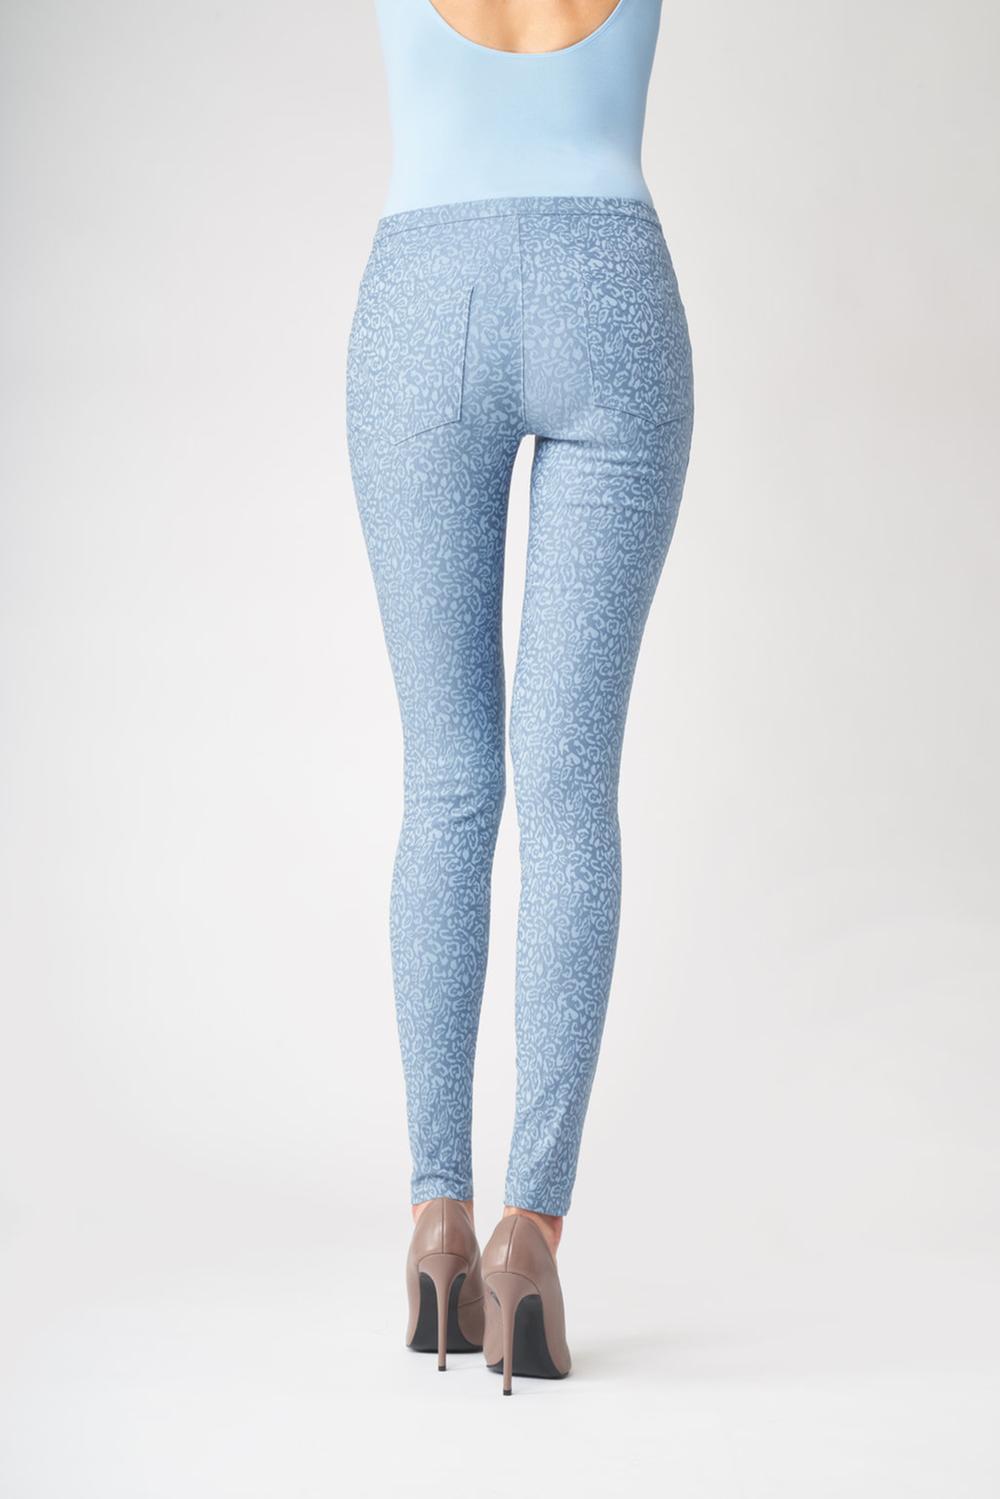 SiSi Animalier Legging - Light blue stretch trouser leggings (treggings) made of viscose with a leopard print style woven jacquard pattern and rear pockets.